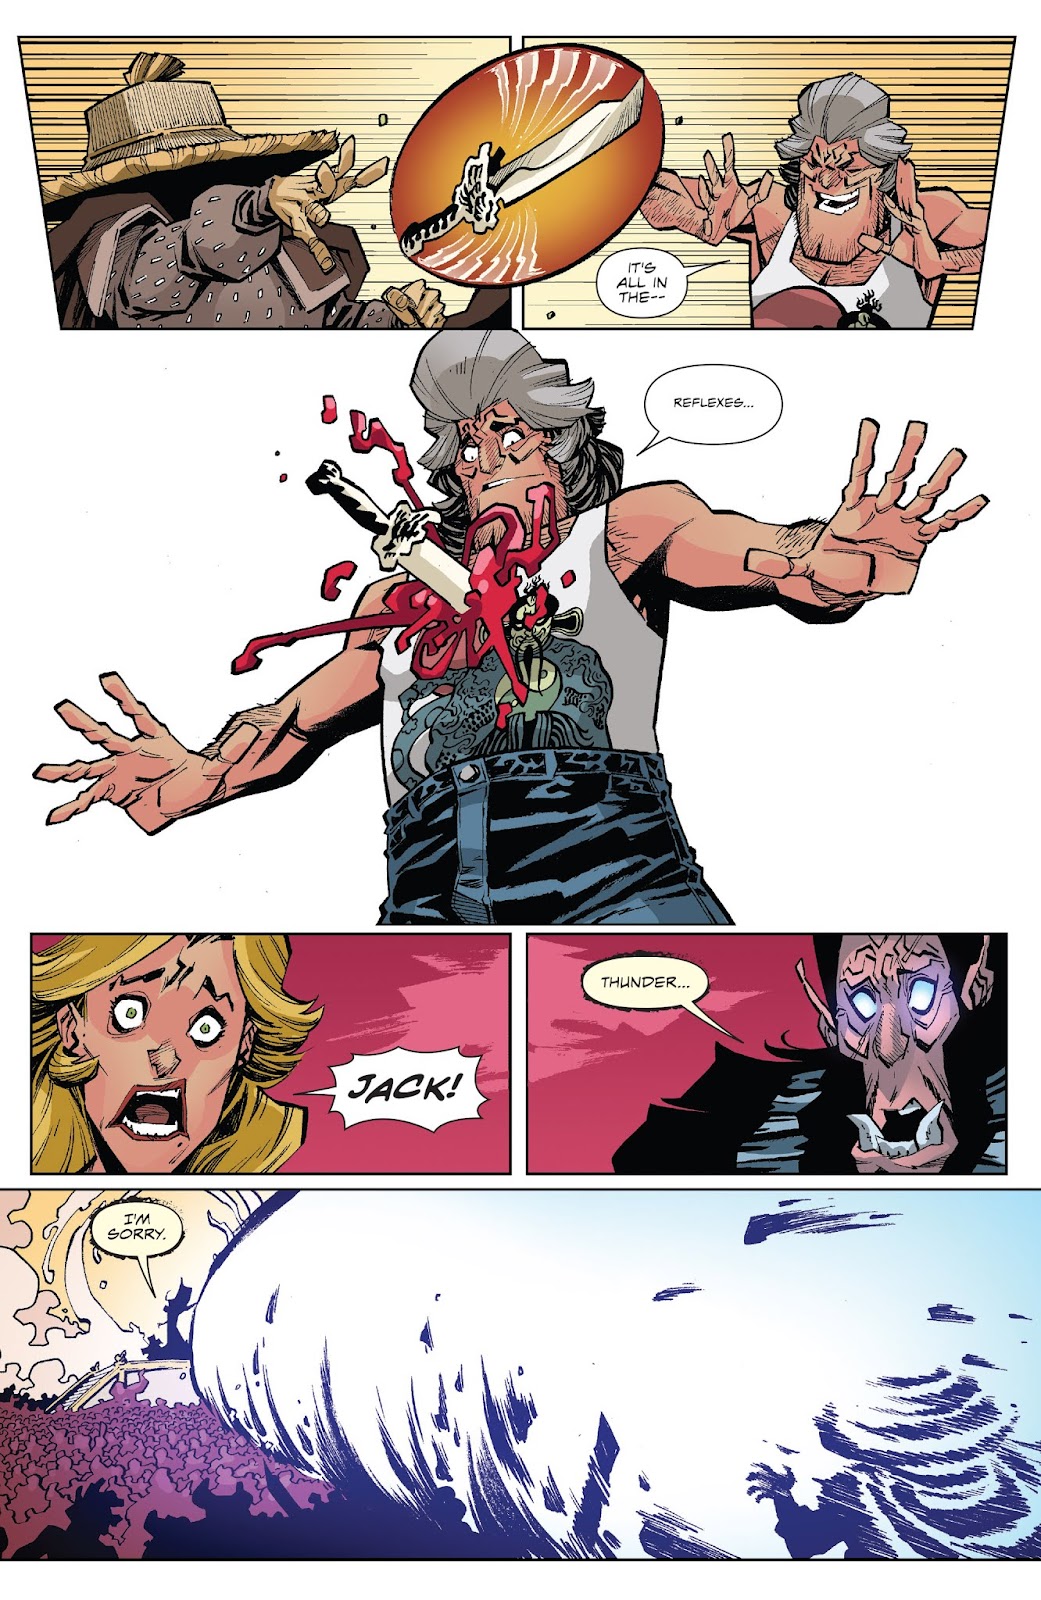 Big Trouble in Little China: Old Man Jack issue 12 - Page 19